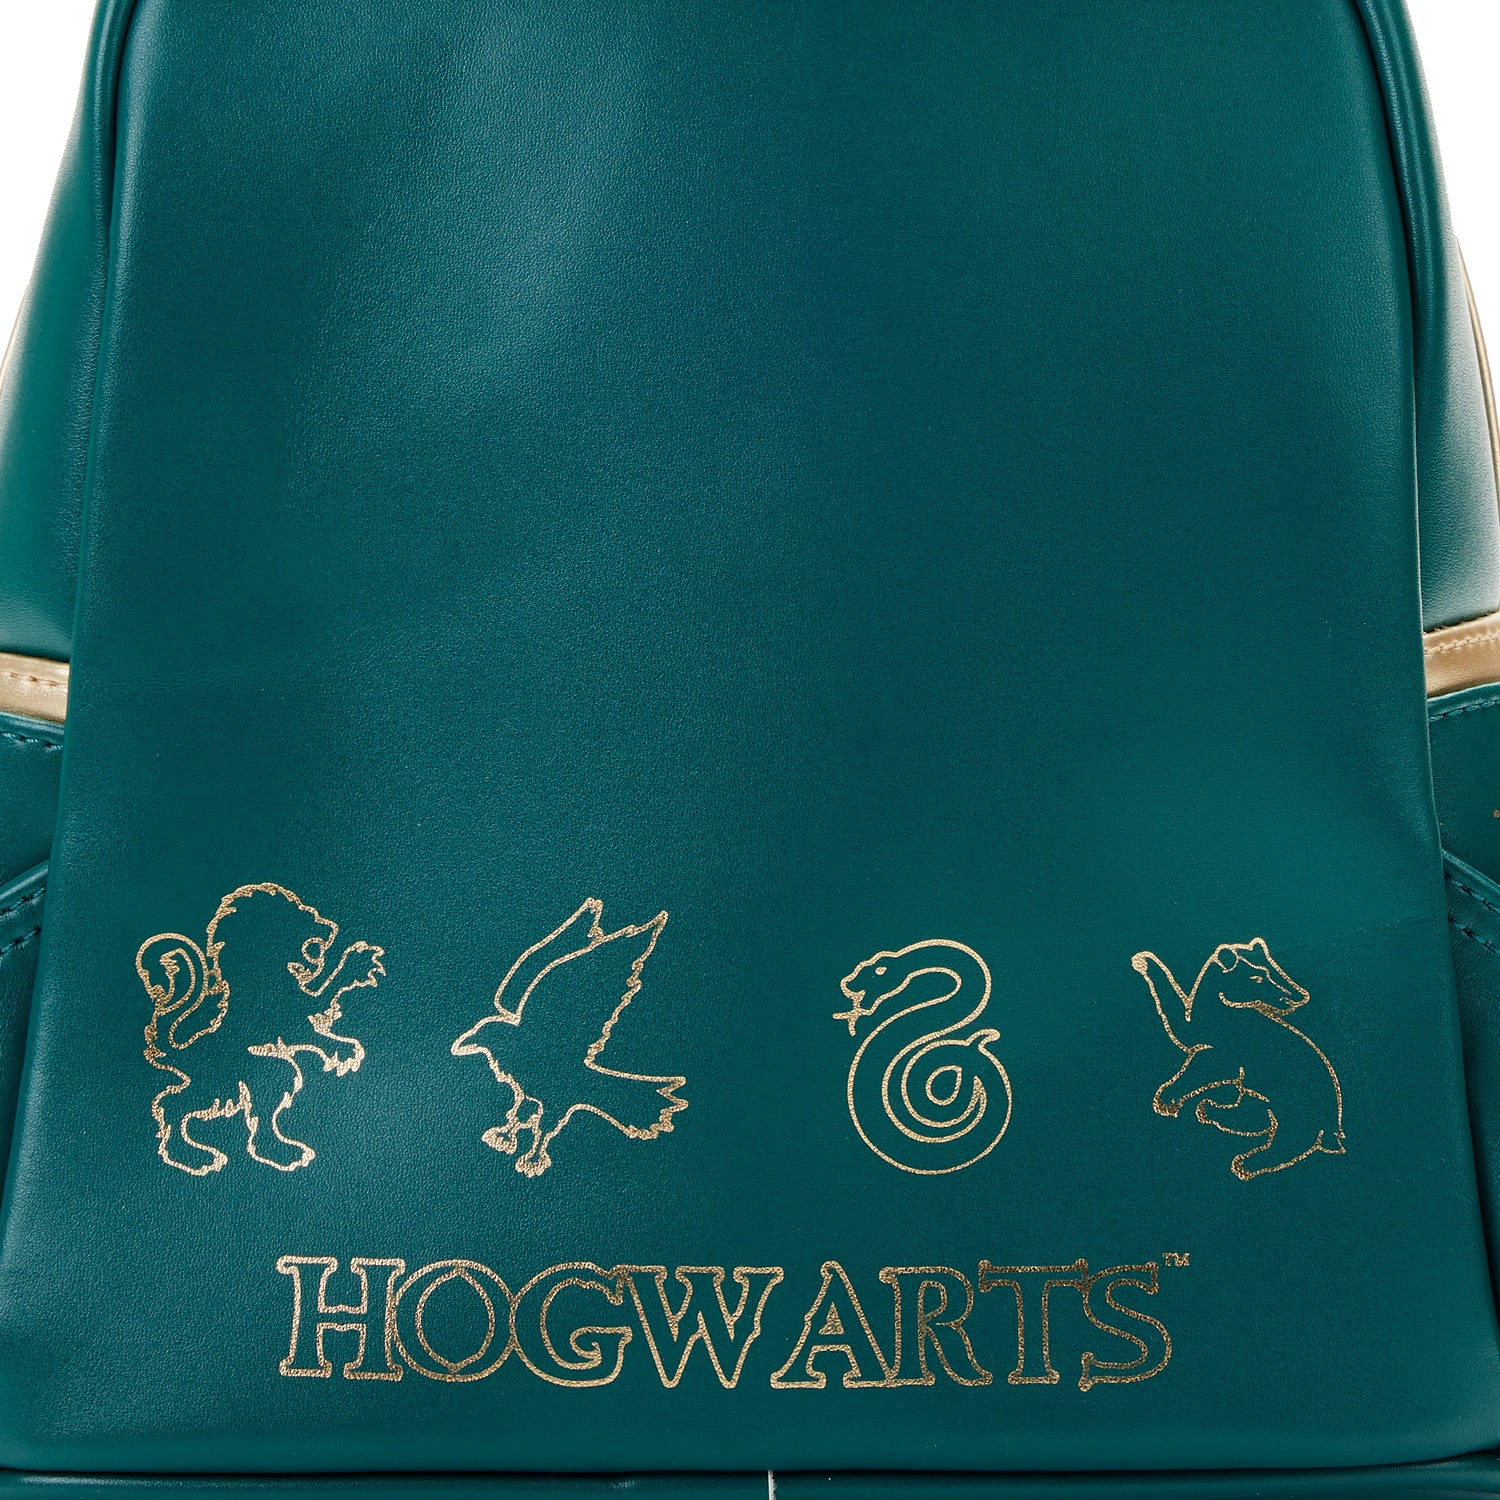 Loungefly Harry Potter School Grounds Mini Backpack - New